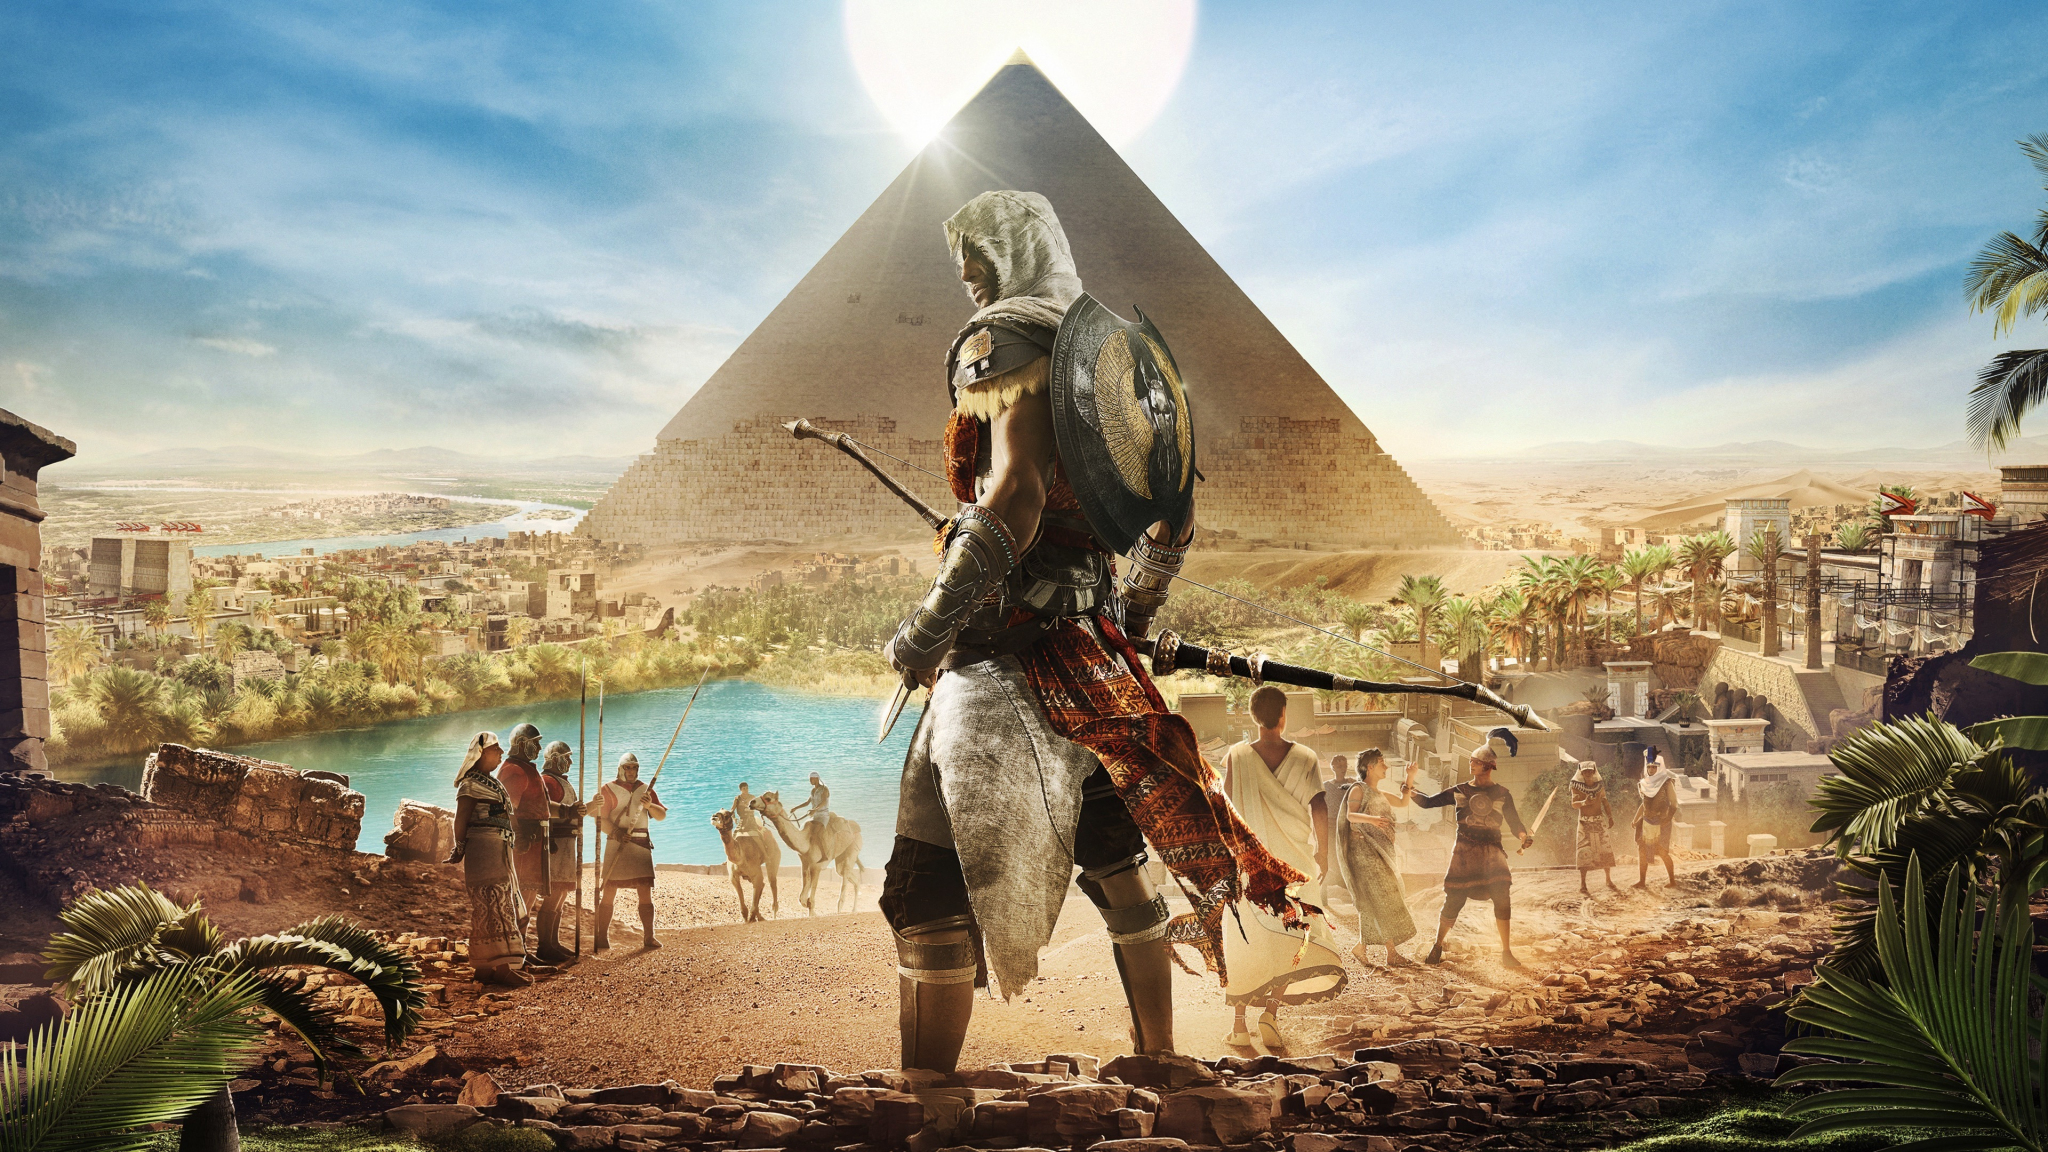 Download wallpaper 2048x1152 assassin's creed: origins, egypt, pyramids,  video game, dual wide 2048x1152 hd background, 2296